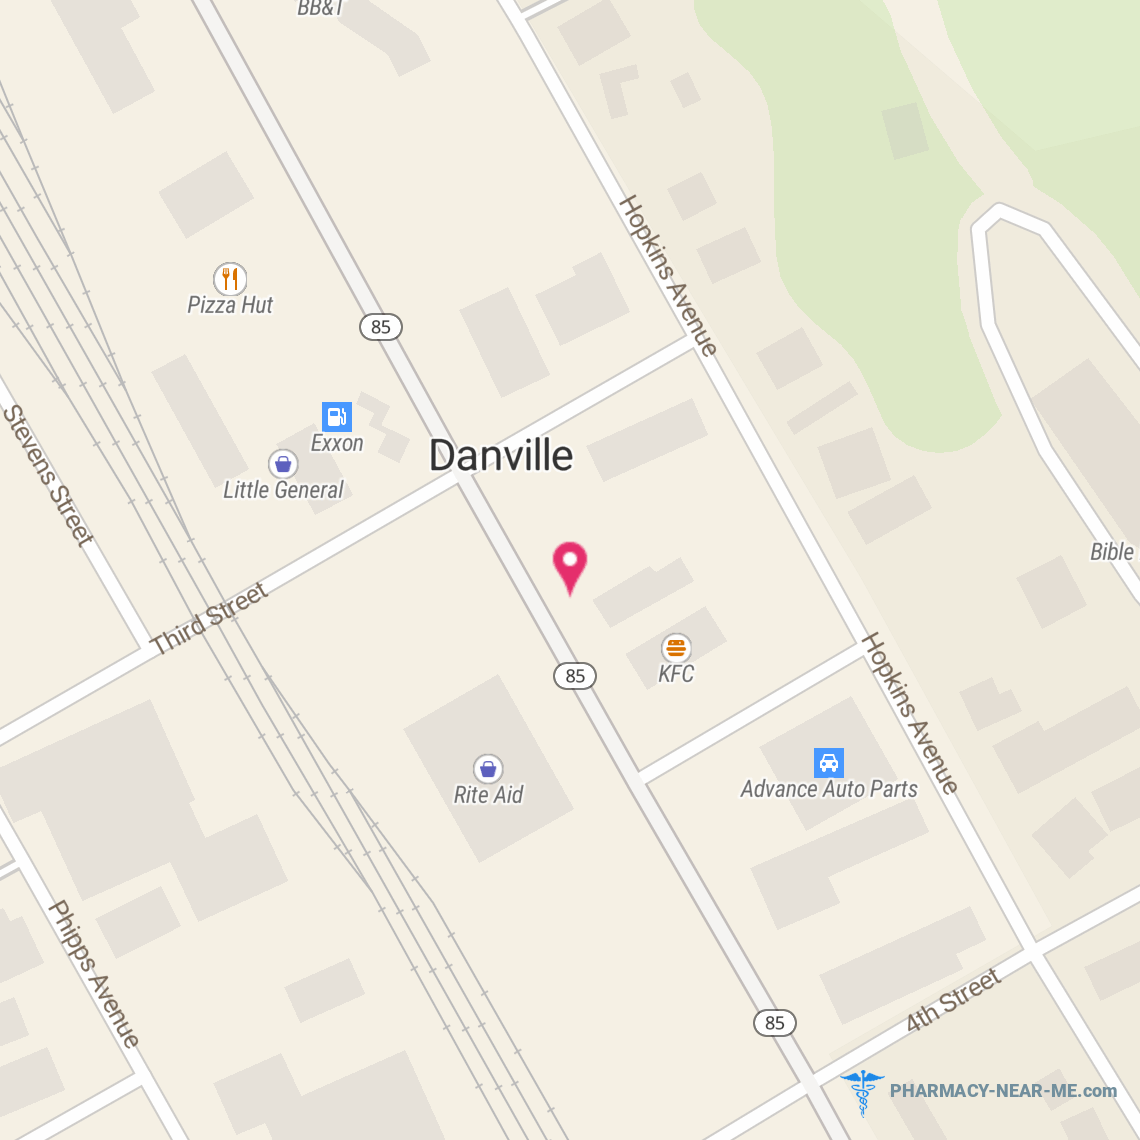 DANVILLE PHARMACY LLC - Pharmacy Hours, Phone, Reviews & Information: 2008 Smoot Avenue, Danville, West Virginia 25053, United States